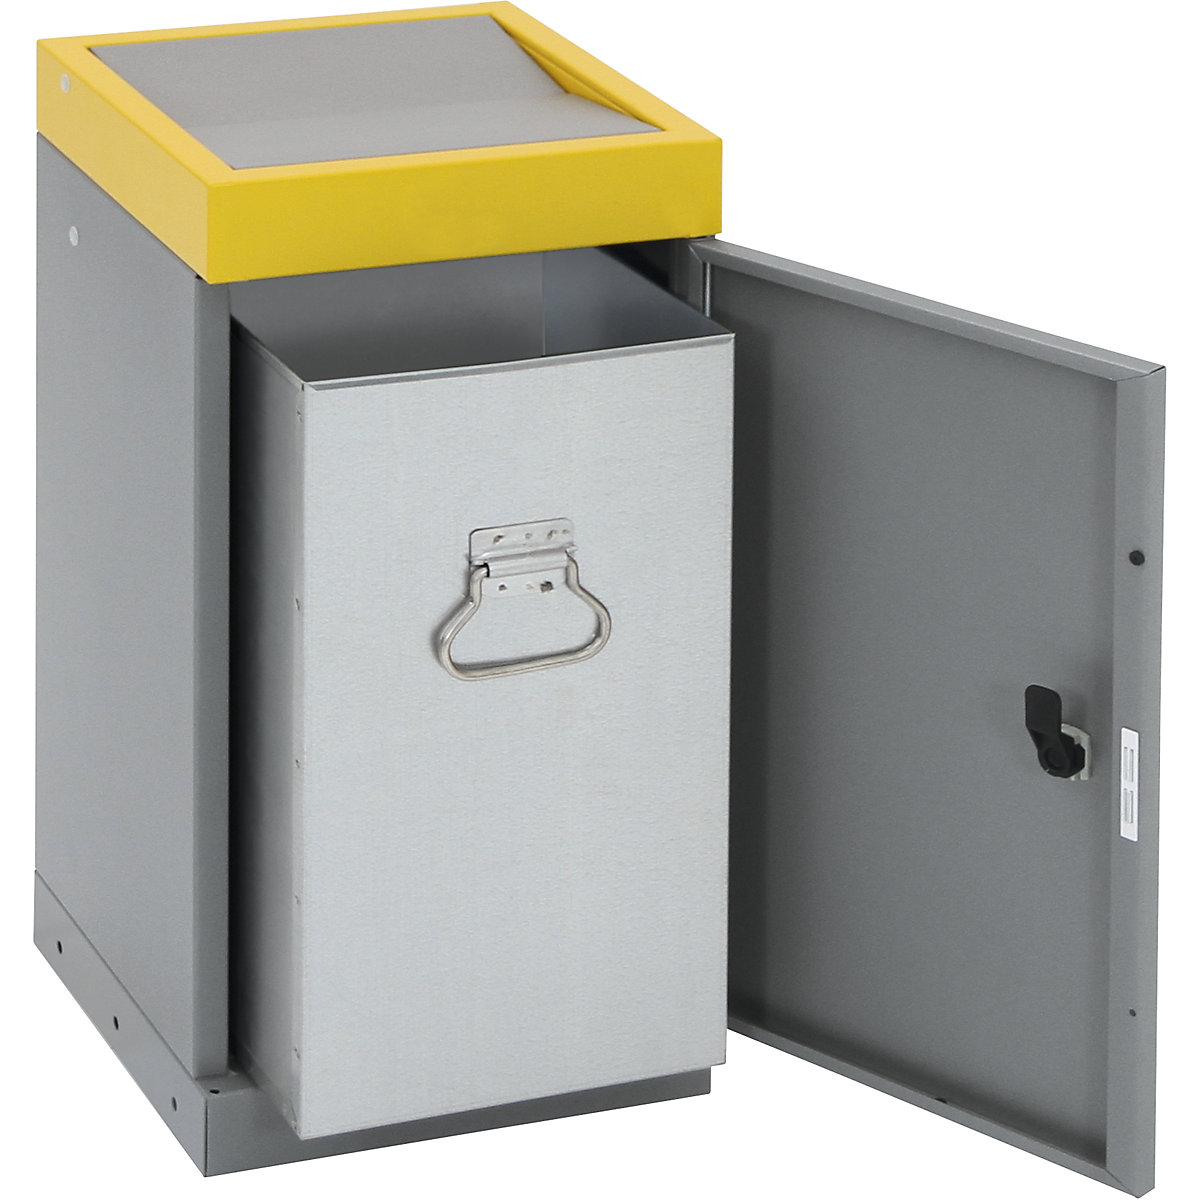 Recyclable waste collector with swing lid, individual unit, capacity 30 l, lid colour yellow / white aluminium-12